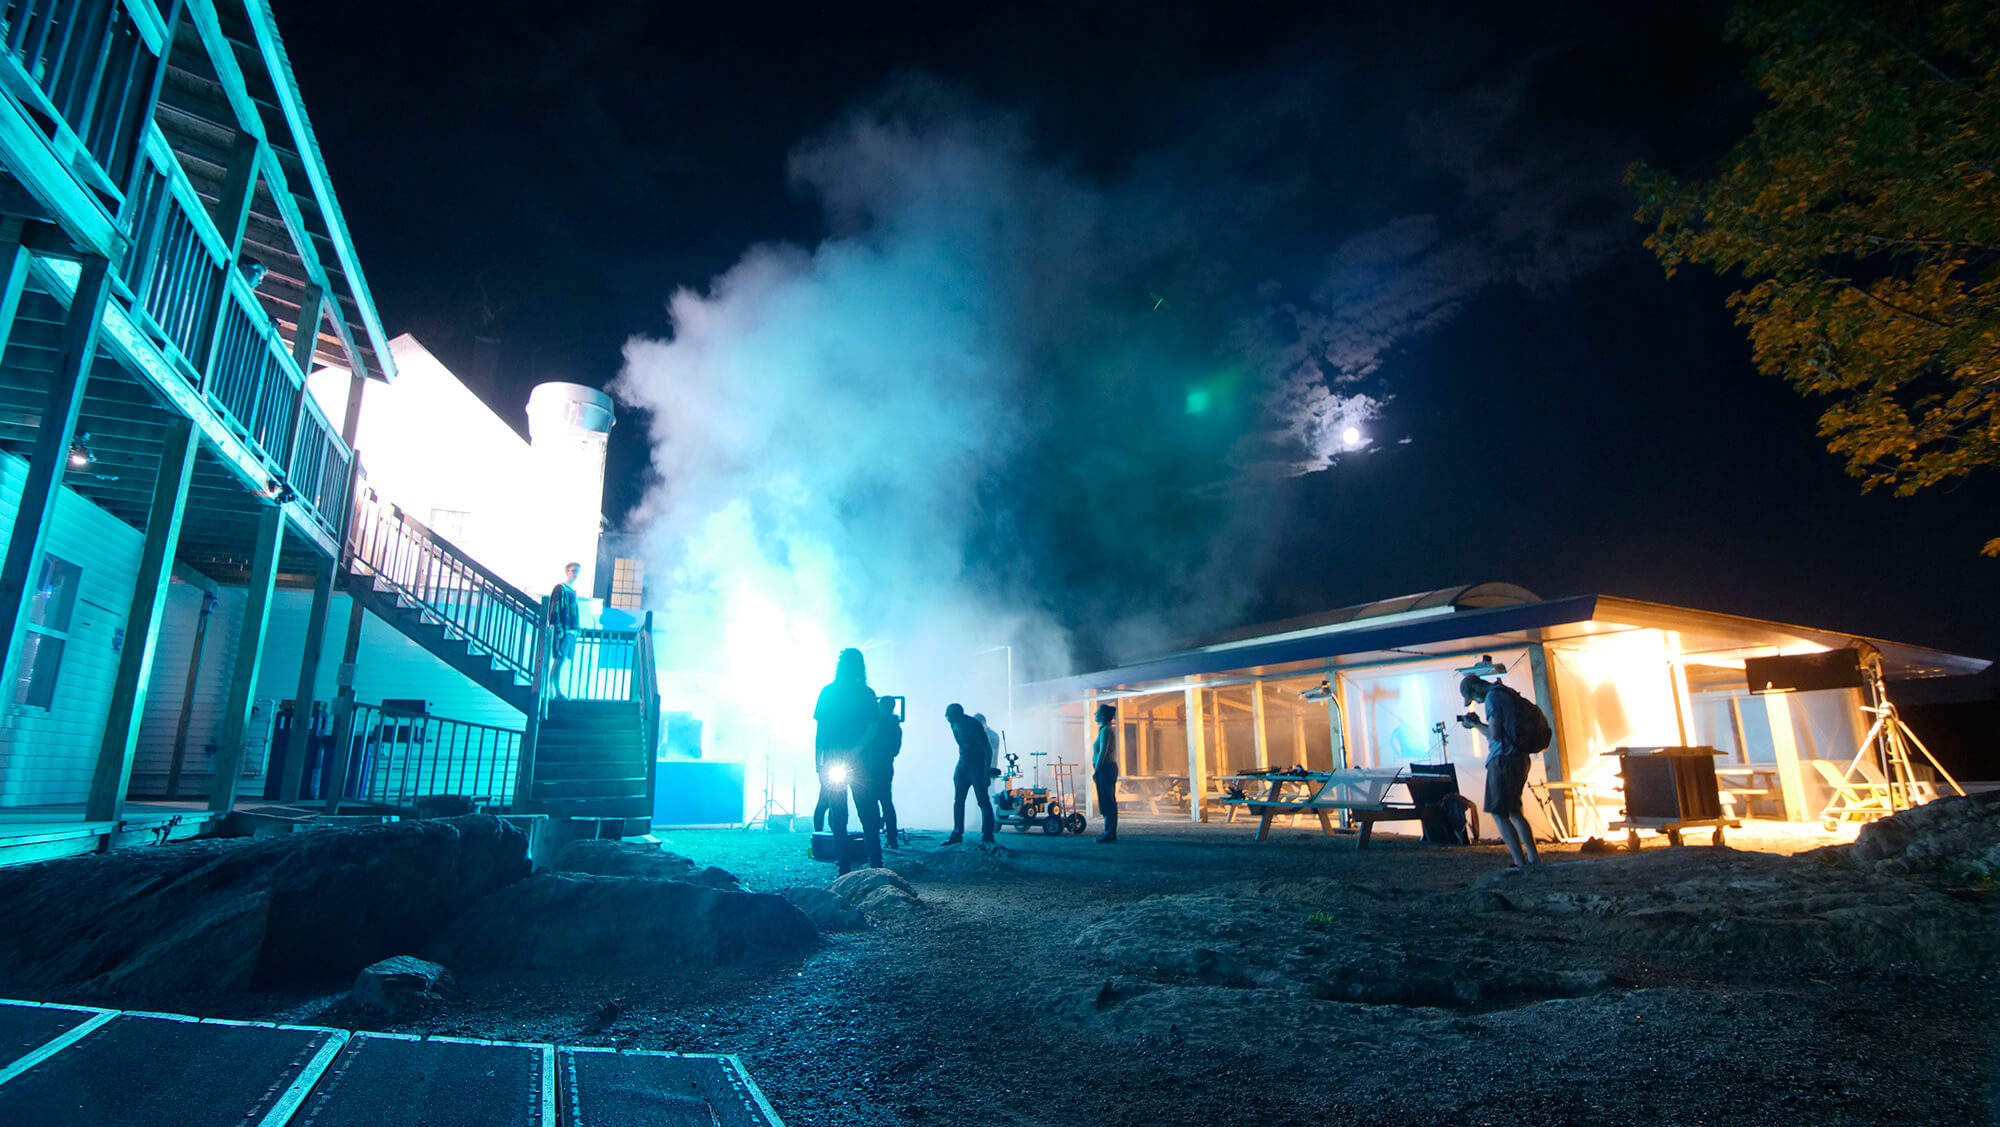 A night shoot on the Maine Media campus - Photo by Tom Ryan